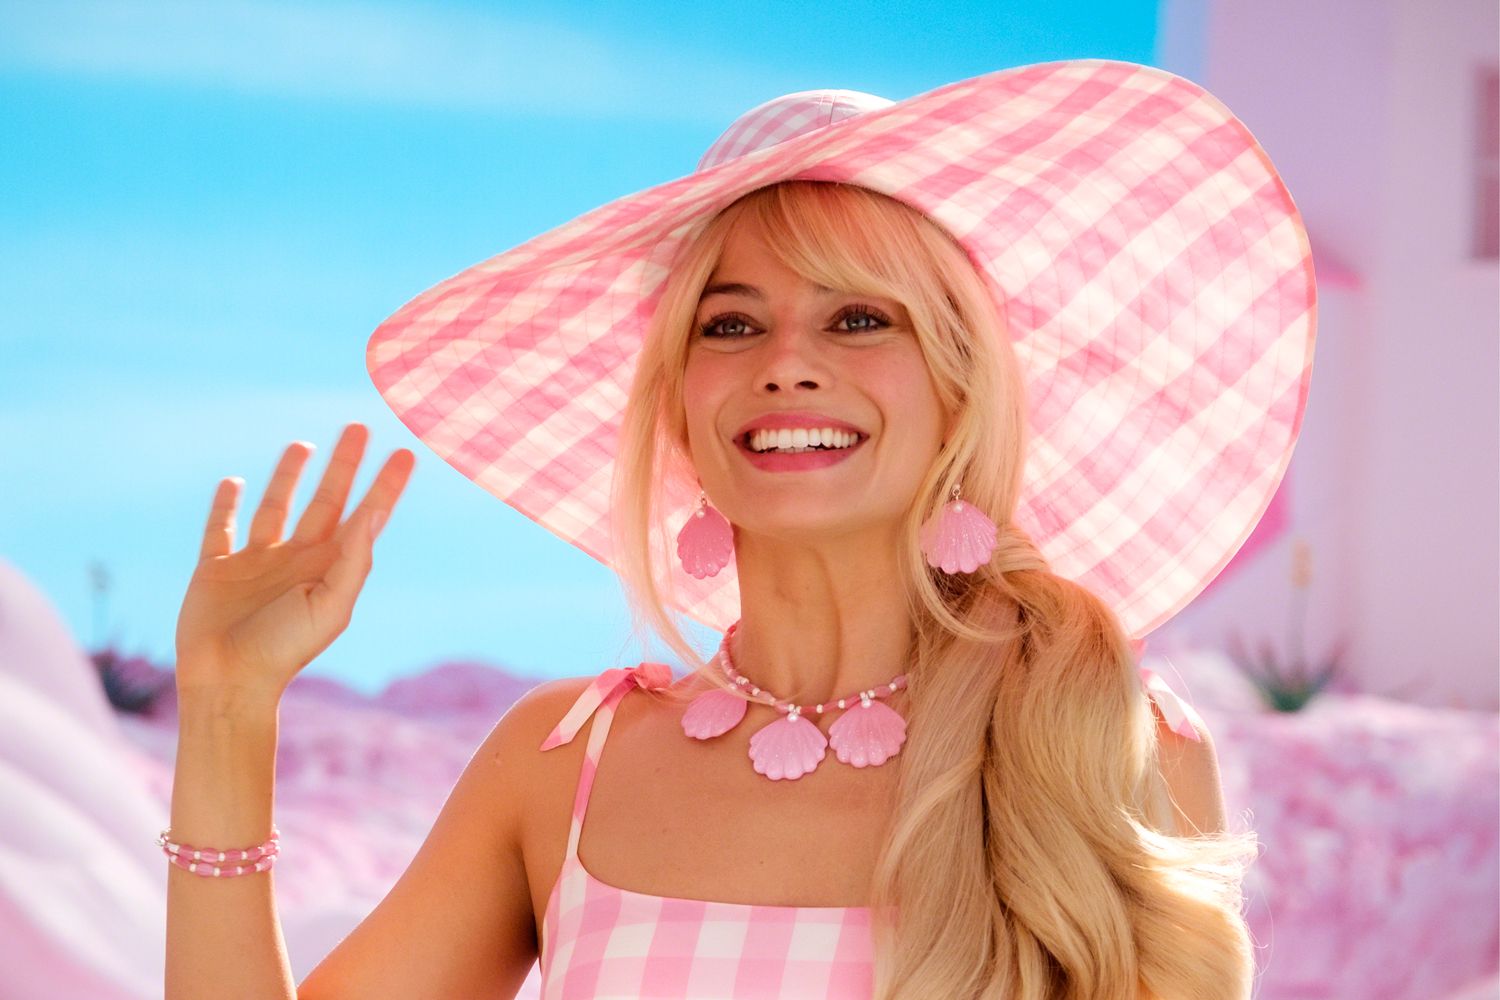 There's plenty of reason to think that 'Barbie' may sweep the awards season, but what does Margot Robbie think? Let's find out.